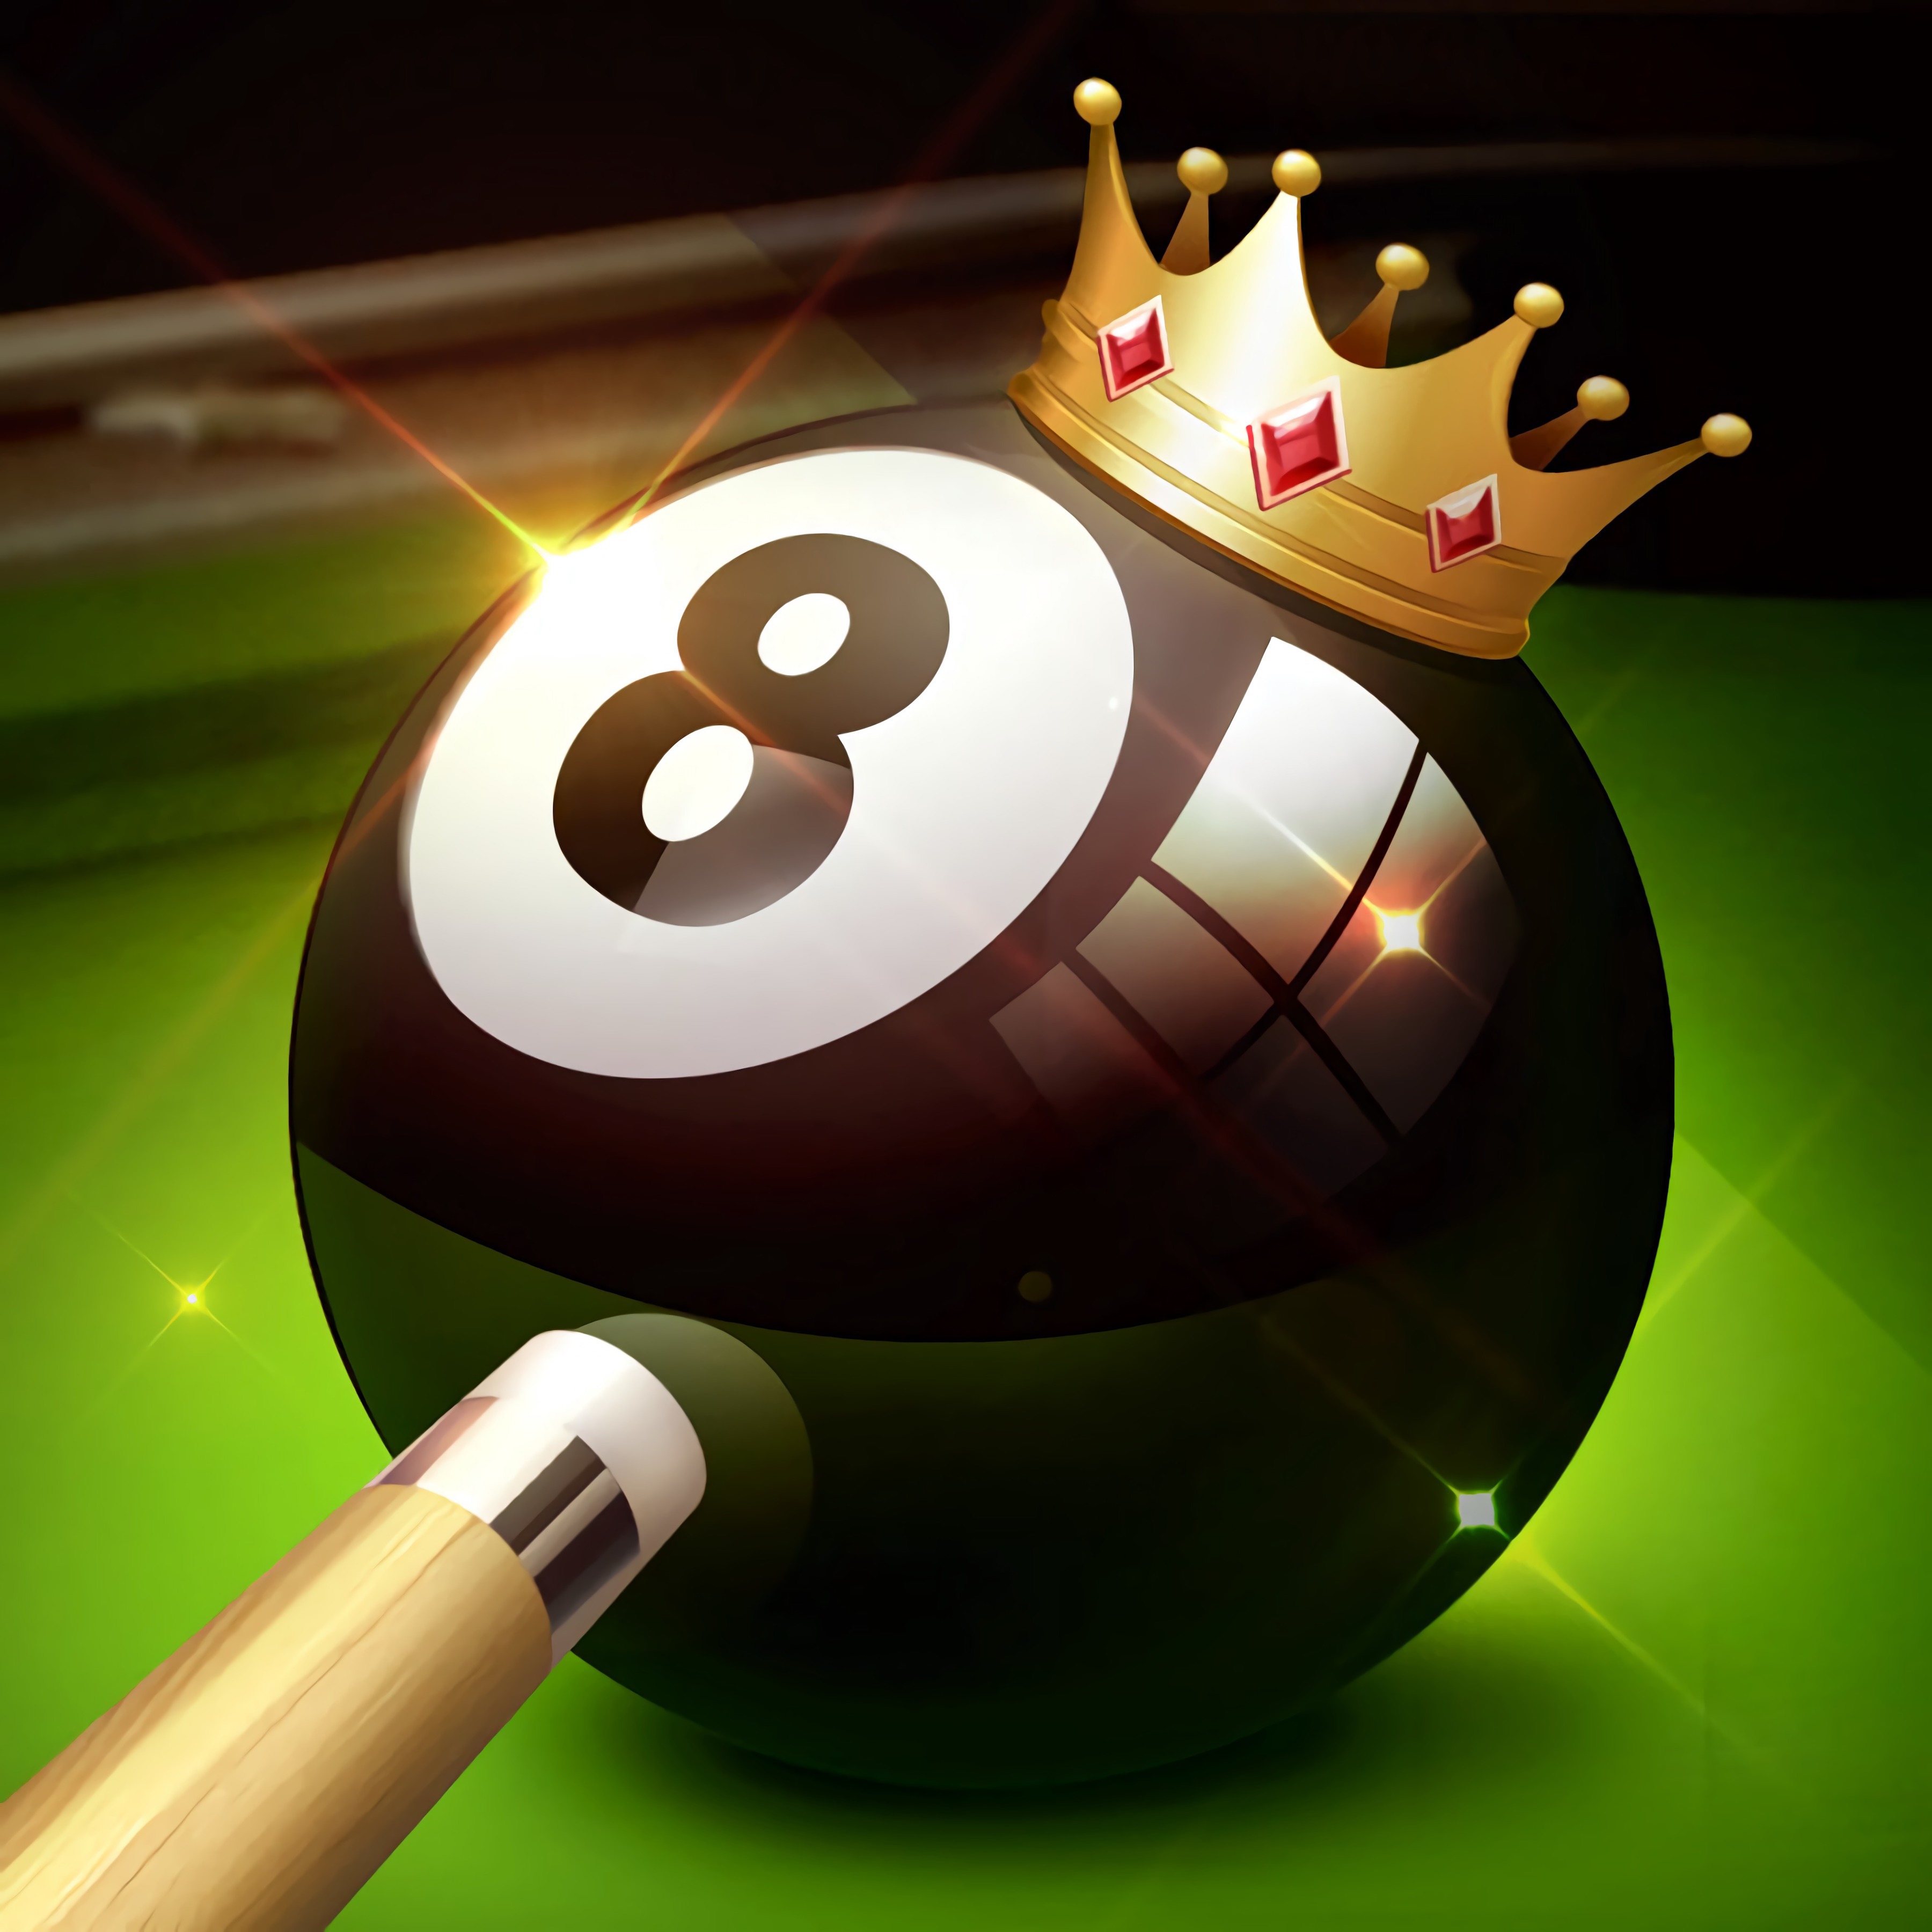 8 Ball pool game Only Offers seller